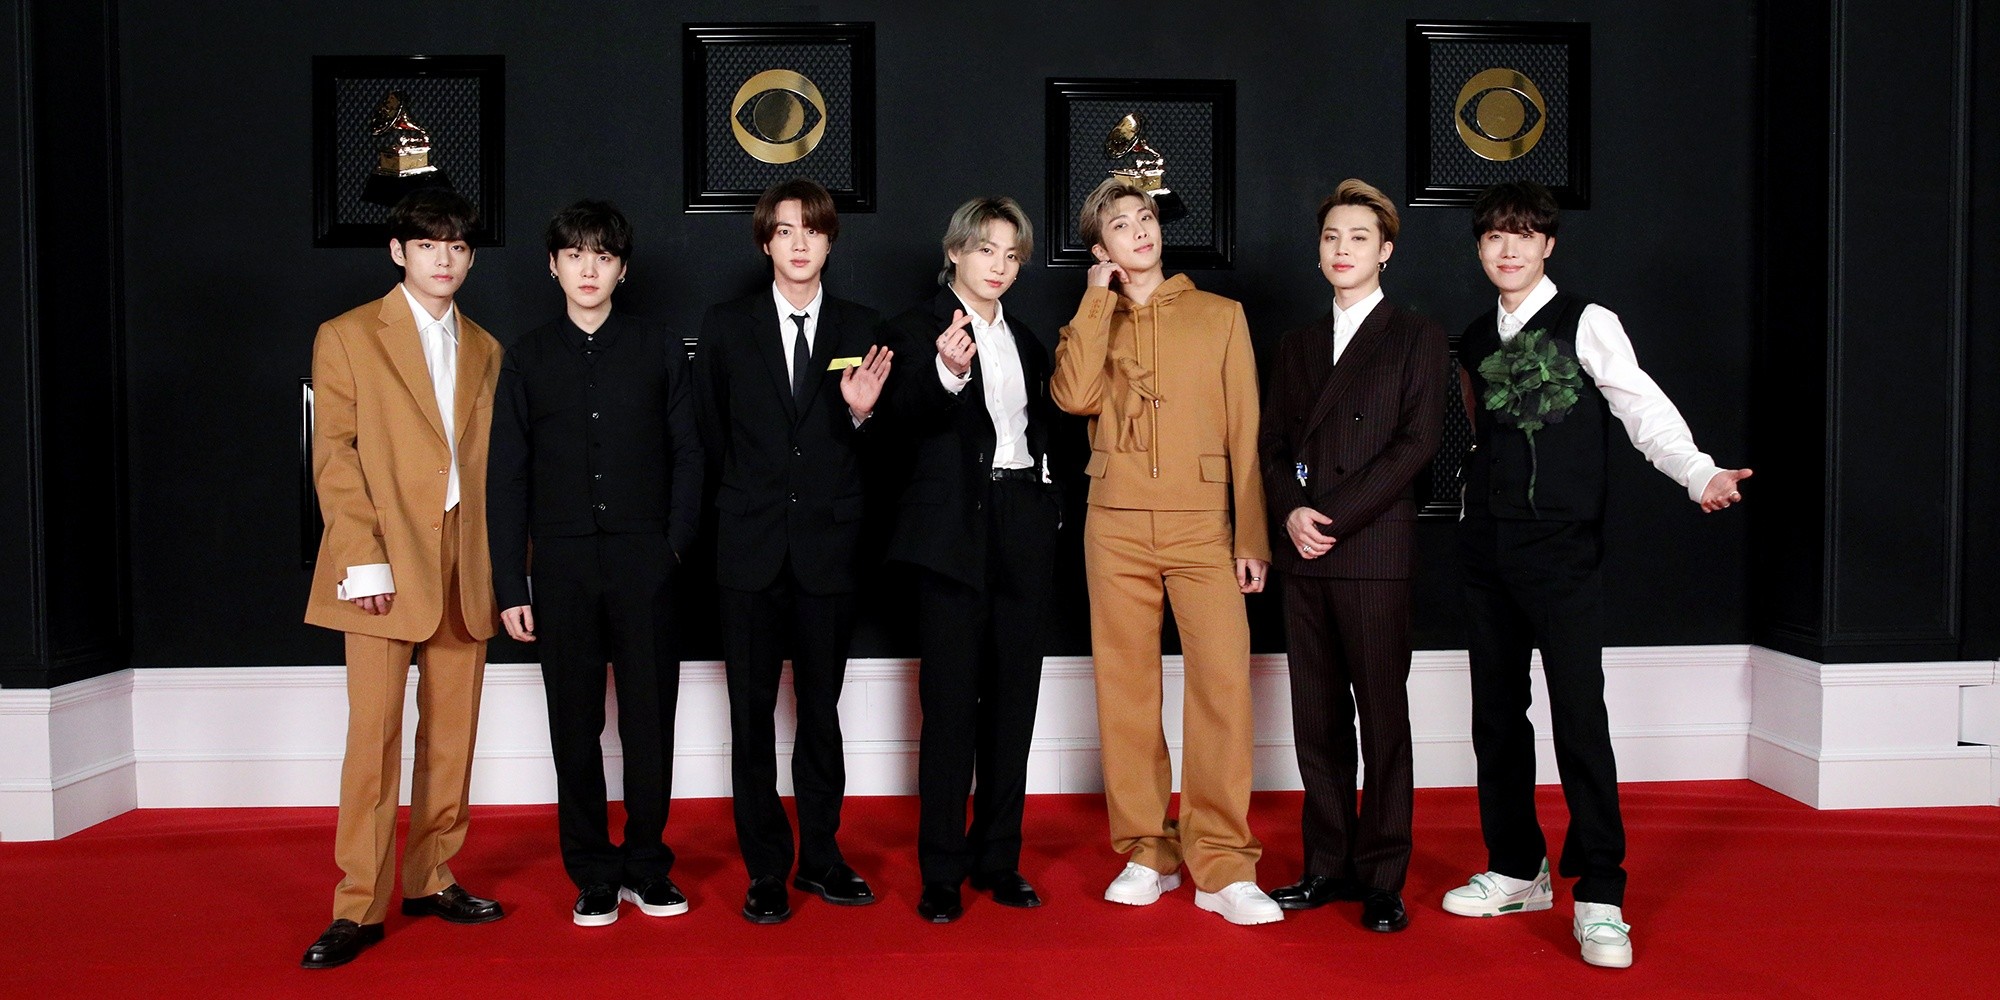 BTS and ARMY take over Twitter with #LightItUpBTS, Bandwagon